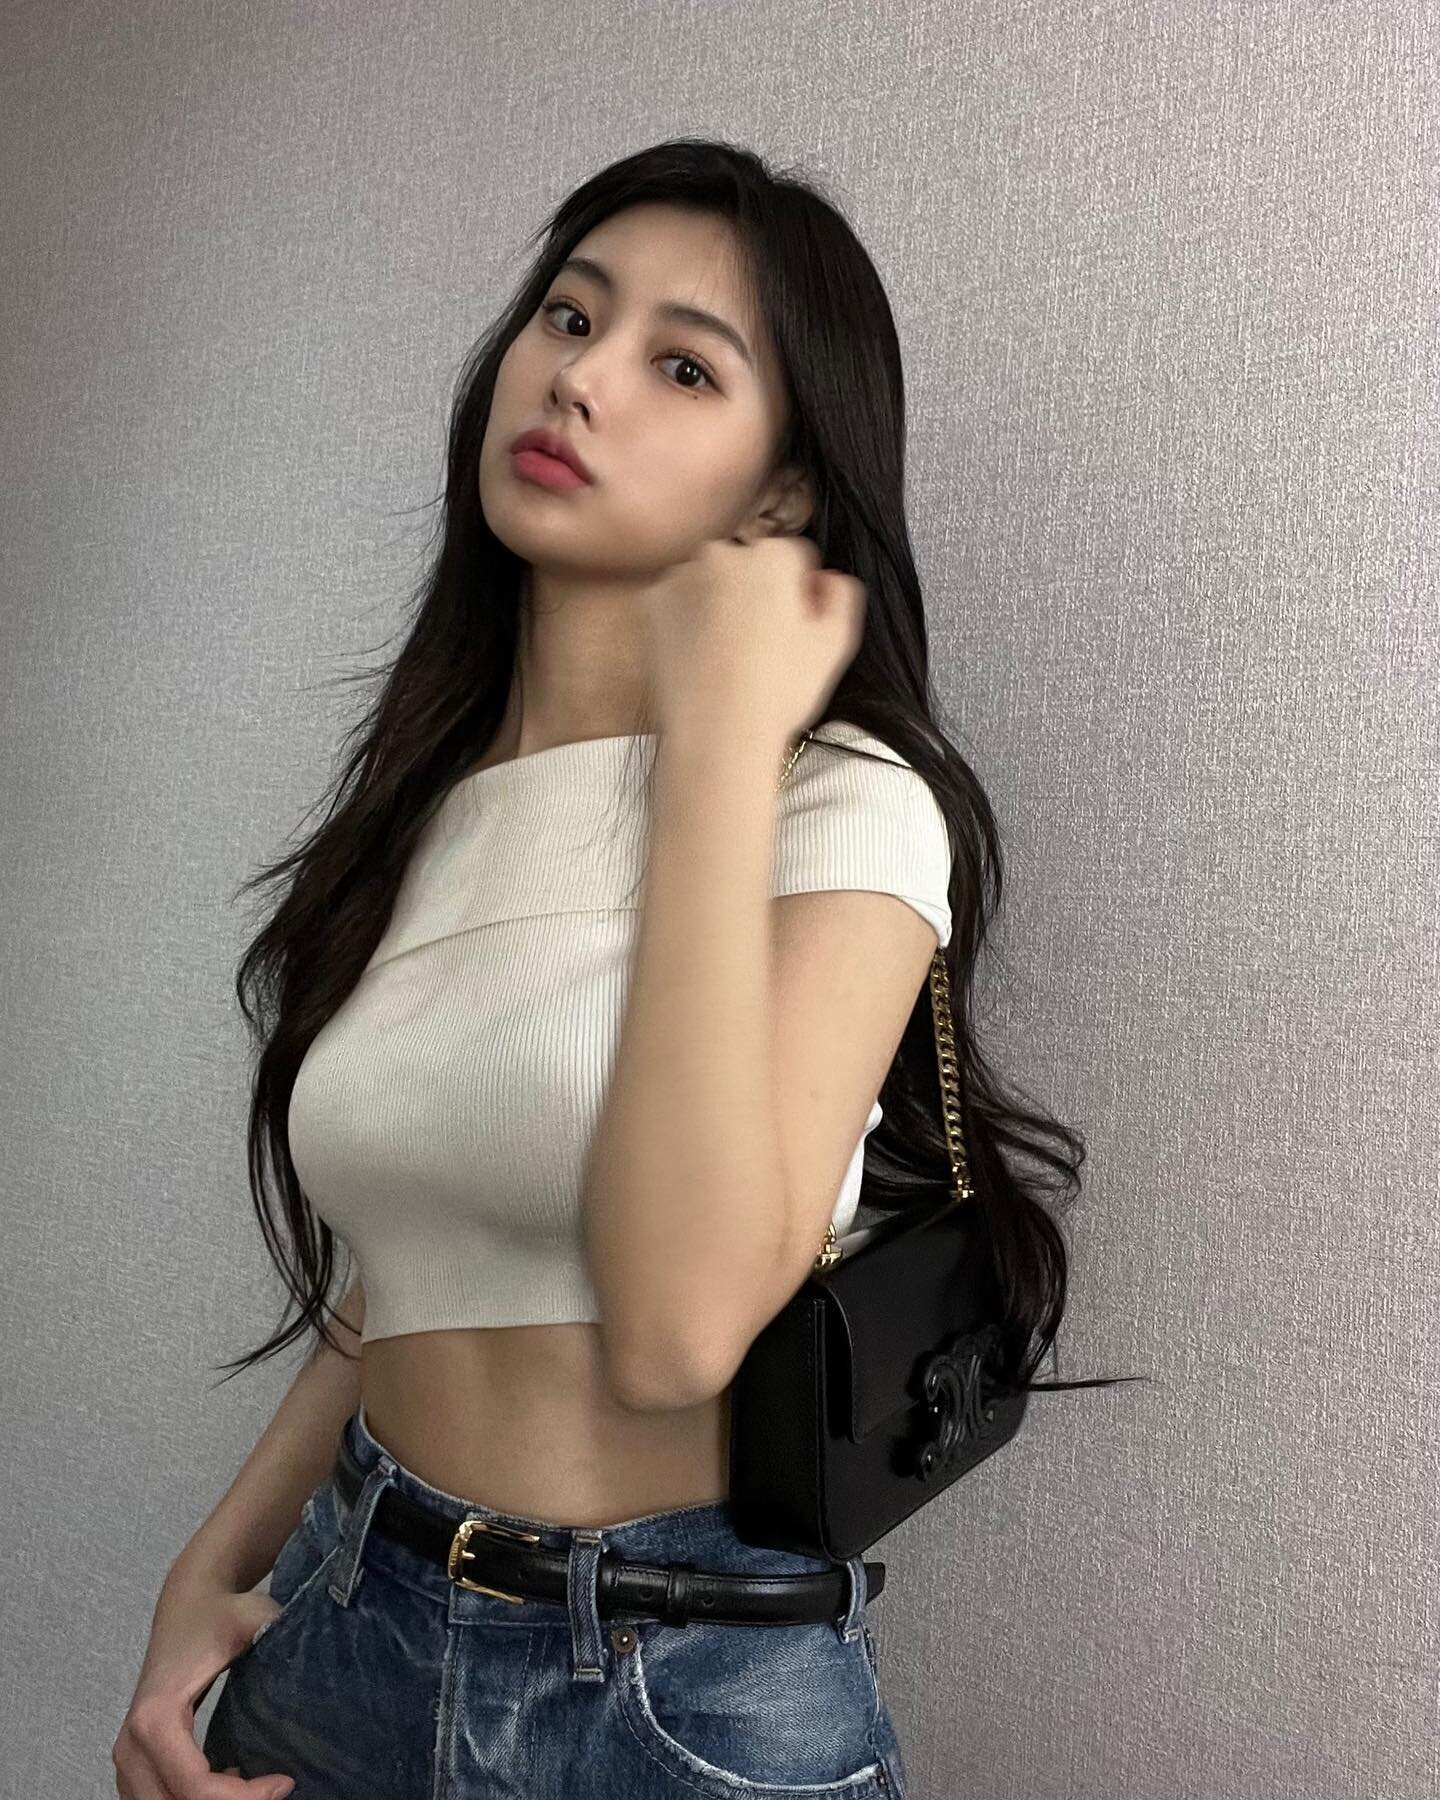 March 4, 2022 Kang Hyewon Instagram Update | Kpopping